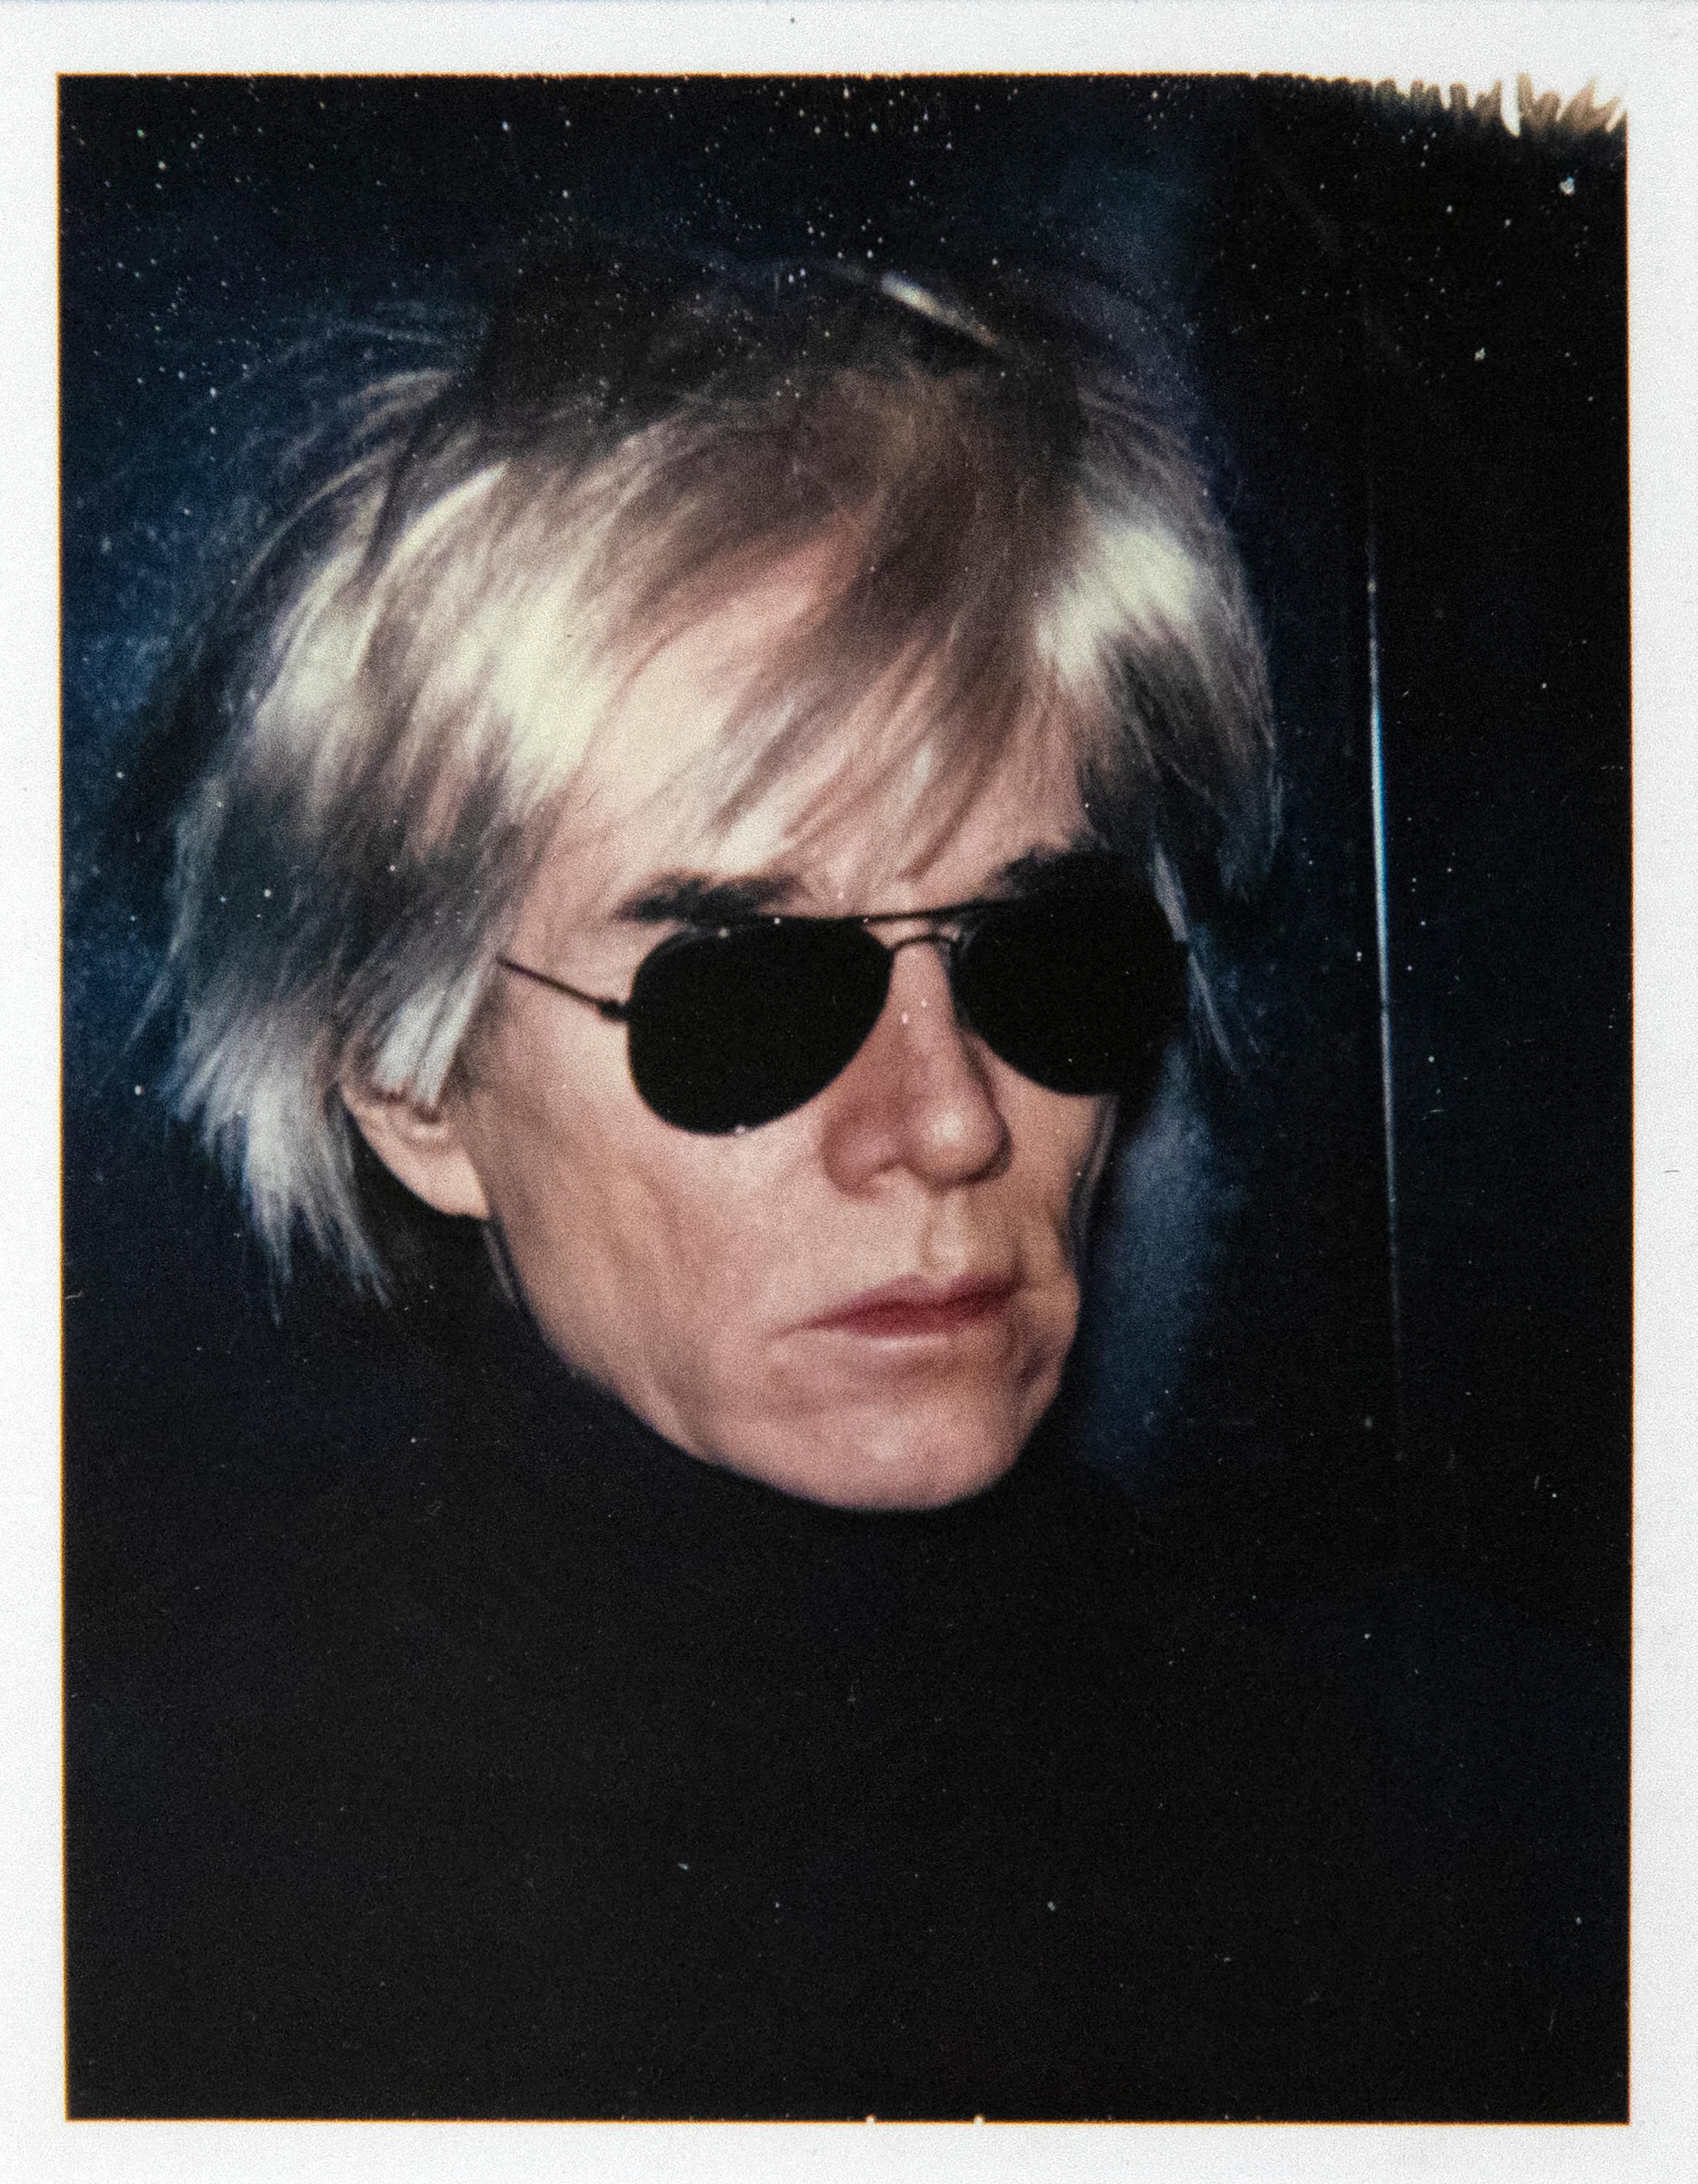 Andy Warhol Portrait Photograph - Self-Portrait in Fright Wig